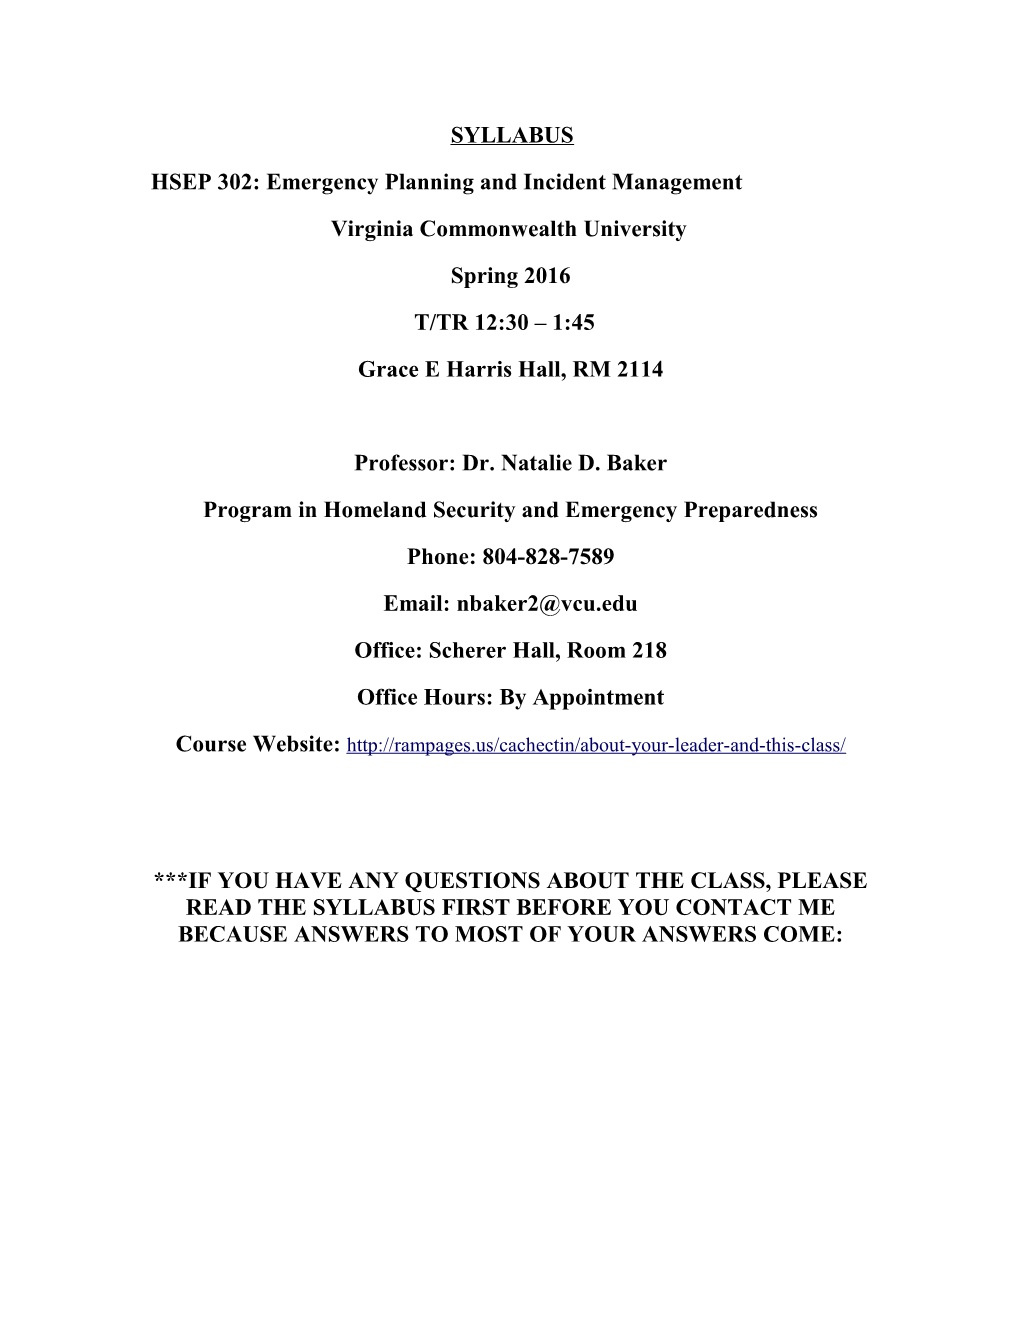 HSEP 302: Emergency Planning and Incident Management